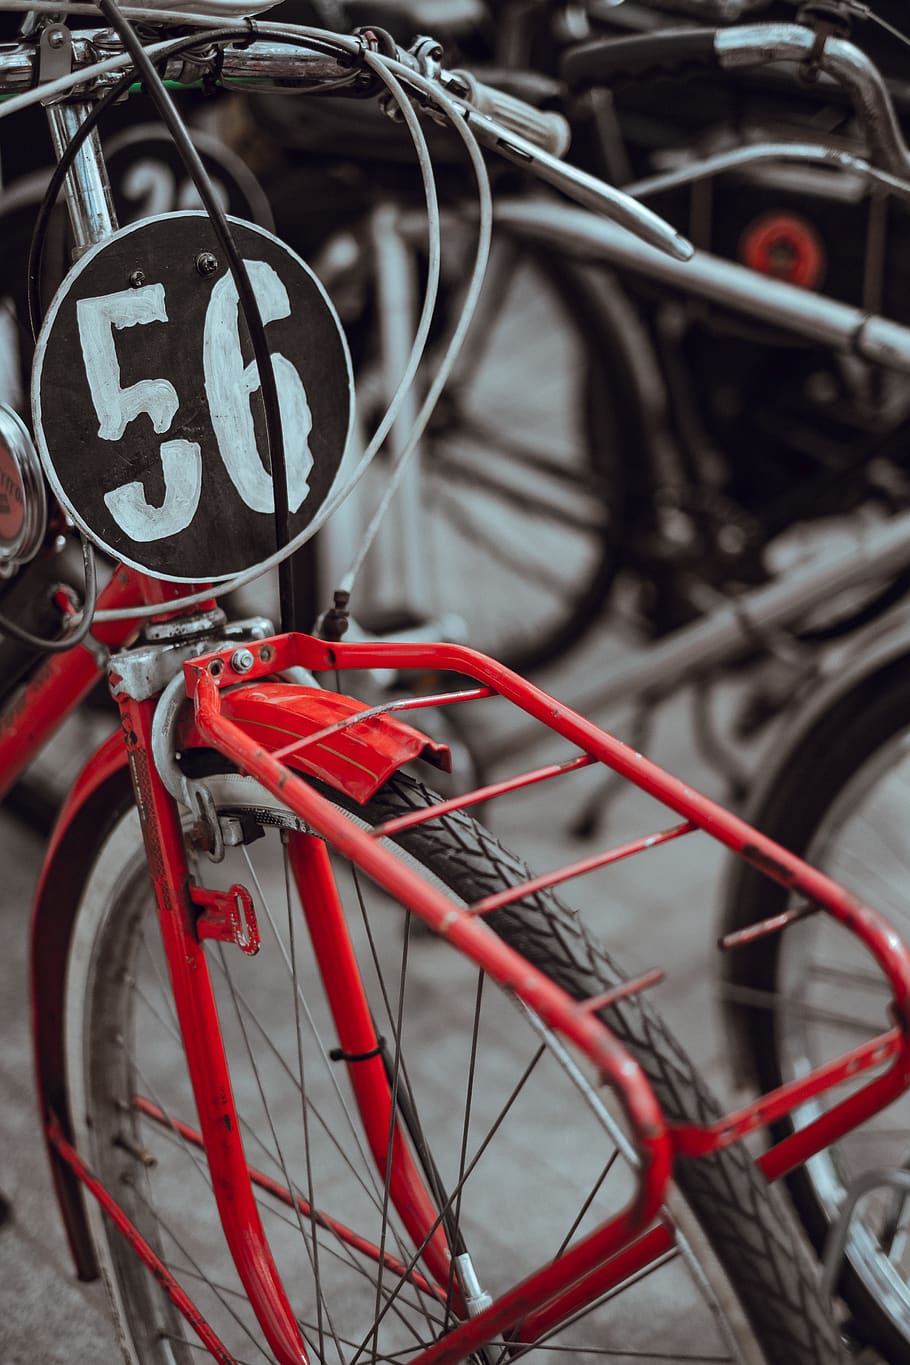 bike, bicycle, wheel, number, outdoor, transportation, land vehicle, mode of transportation, red, stationary